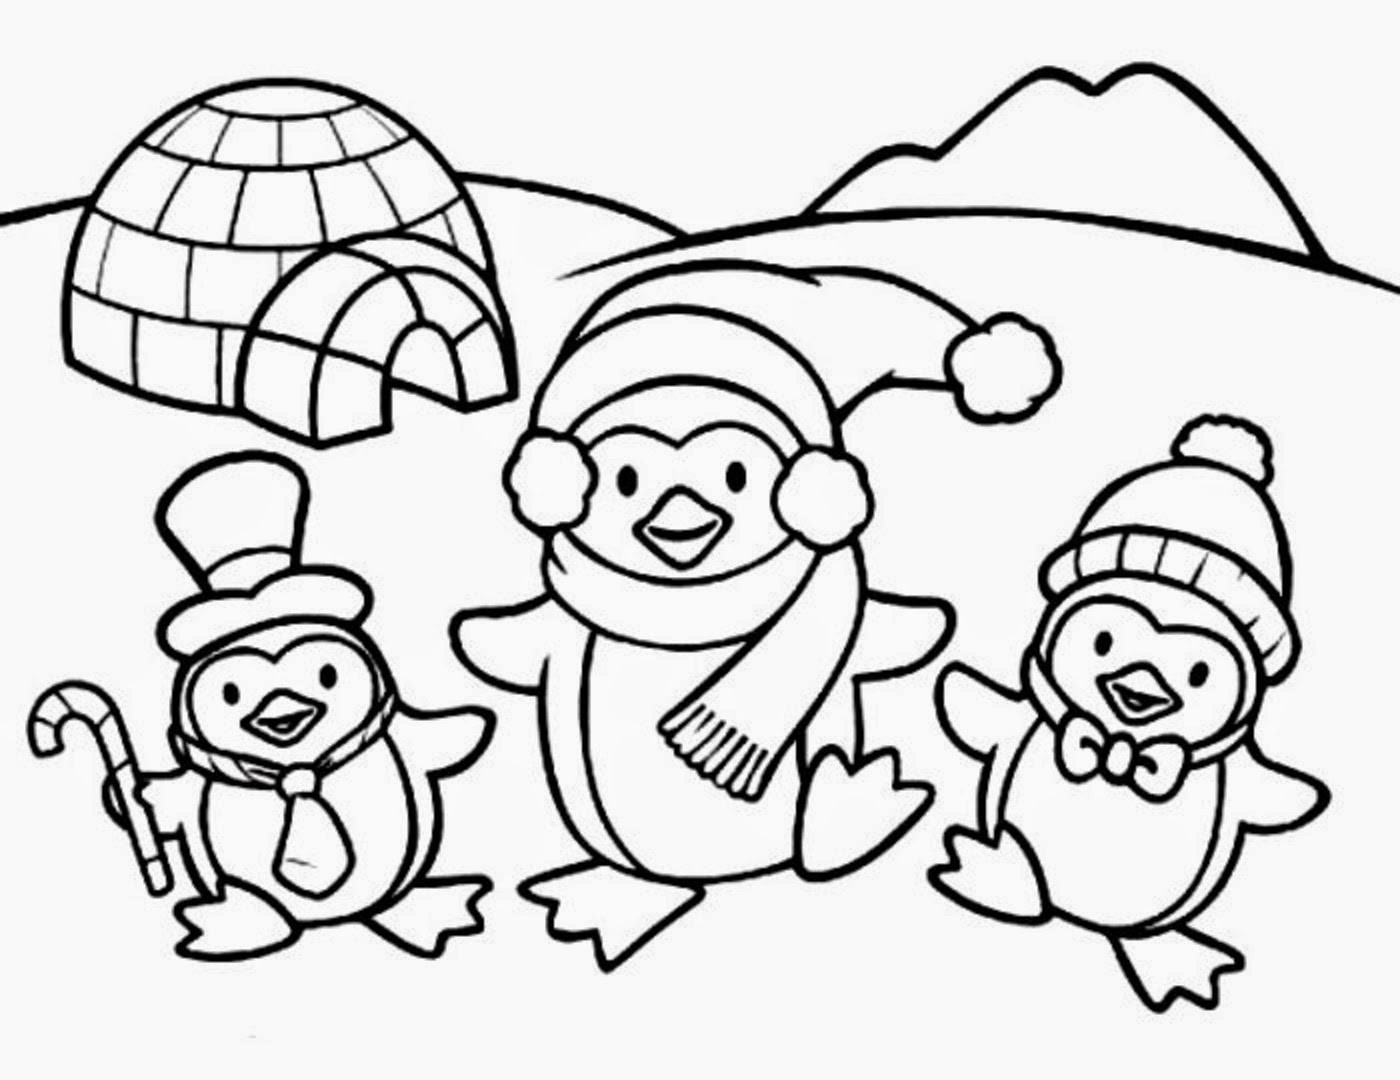 Penguin Coloring Pages For Kids
 colours drawing wallpaper Cute Baby Penguin Colour